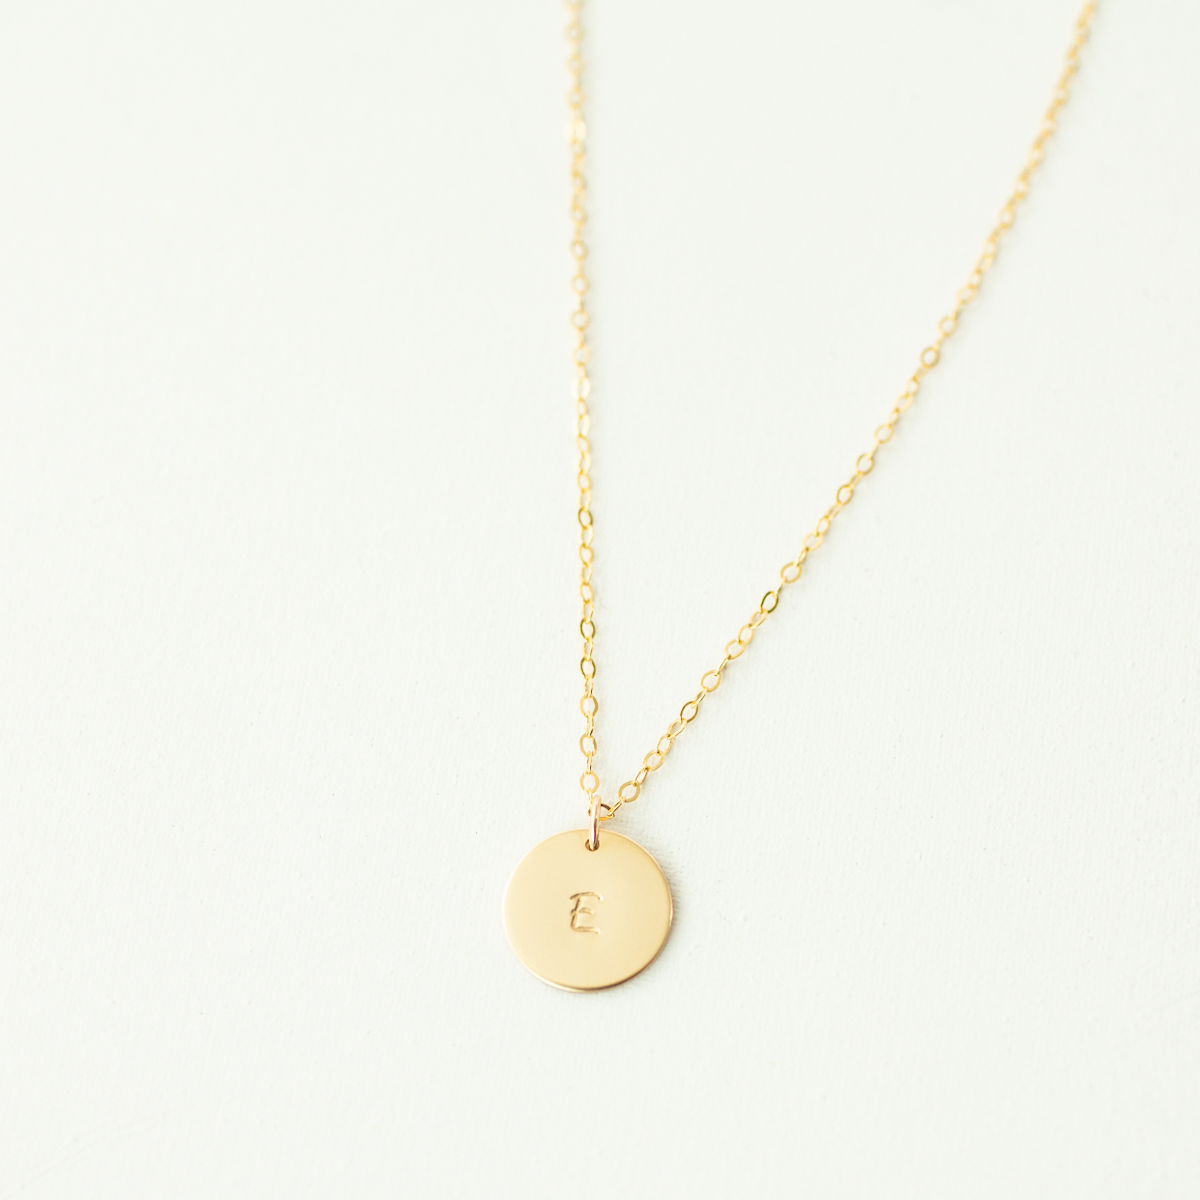 Buy Kate Middleton Monogram Necklace, Disc Initial Necklace , Gold Initial  Necklace, Mother's Day Gift, Birthday Gift, Gold Letter Necklace Online in  India - Etsy